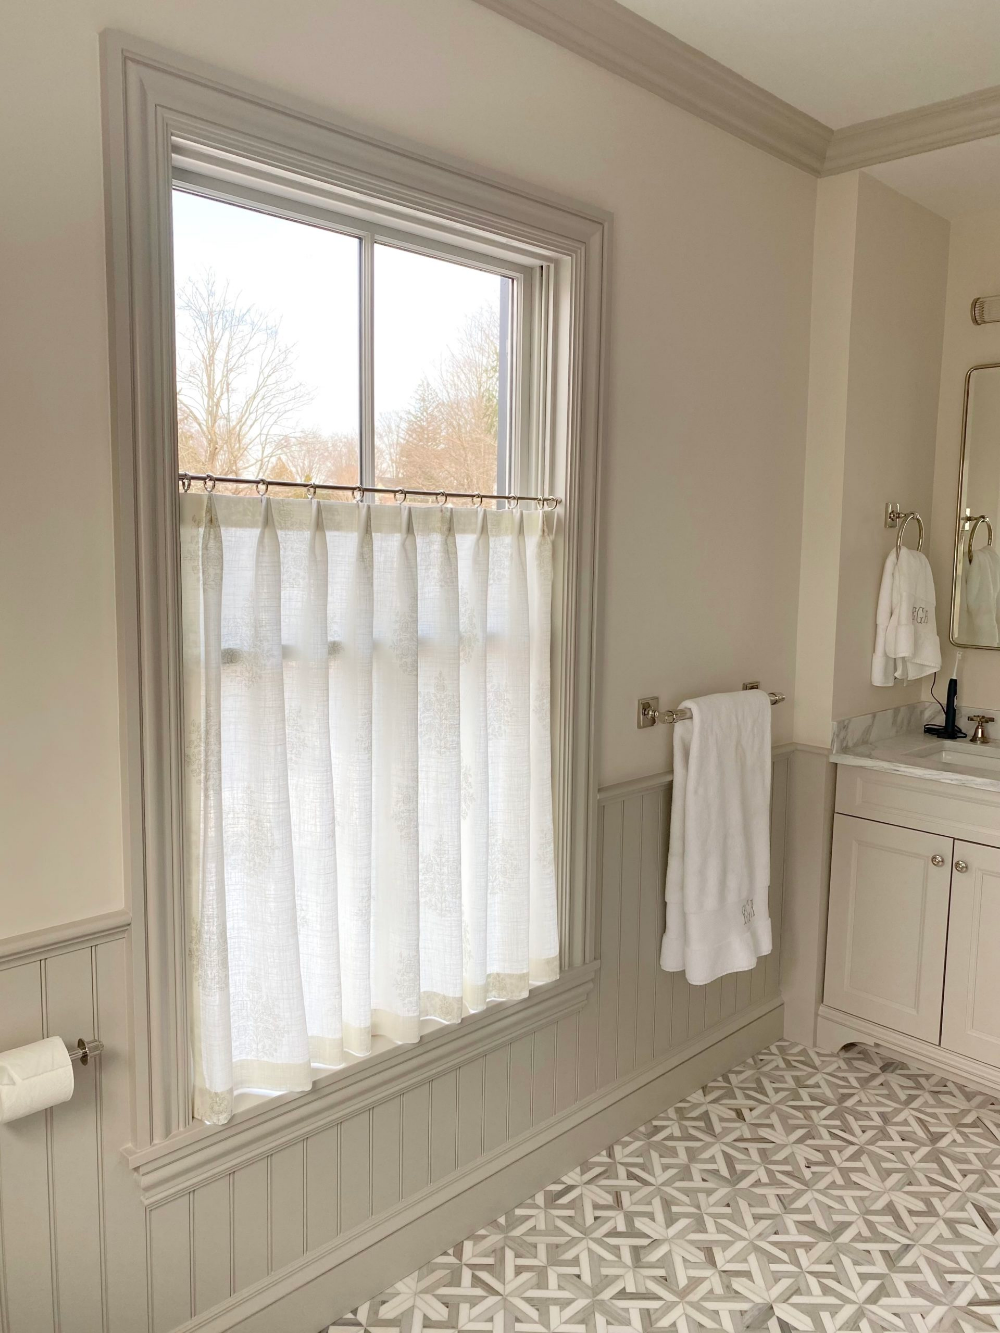 Bathroom Curtains: Adding Style and
Privacy to Your Space